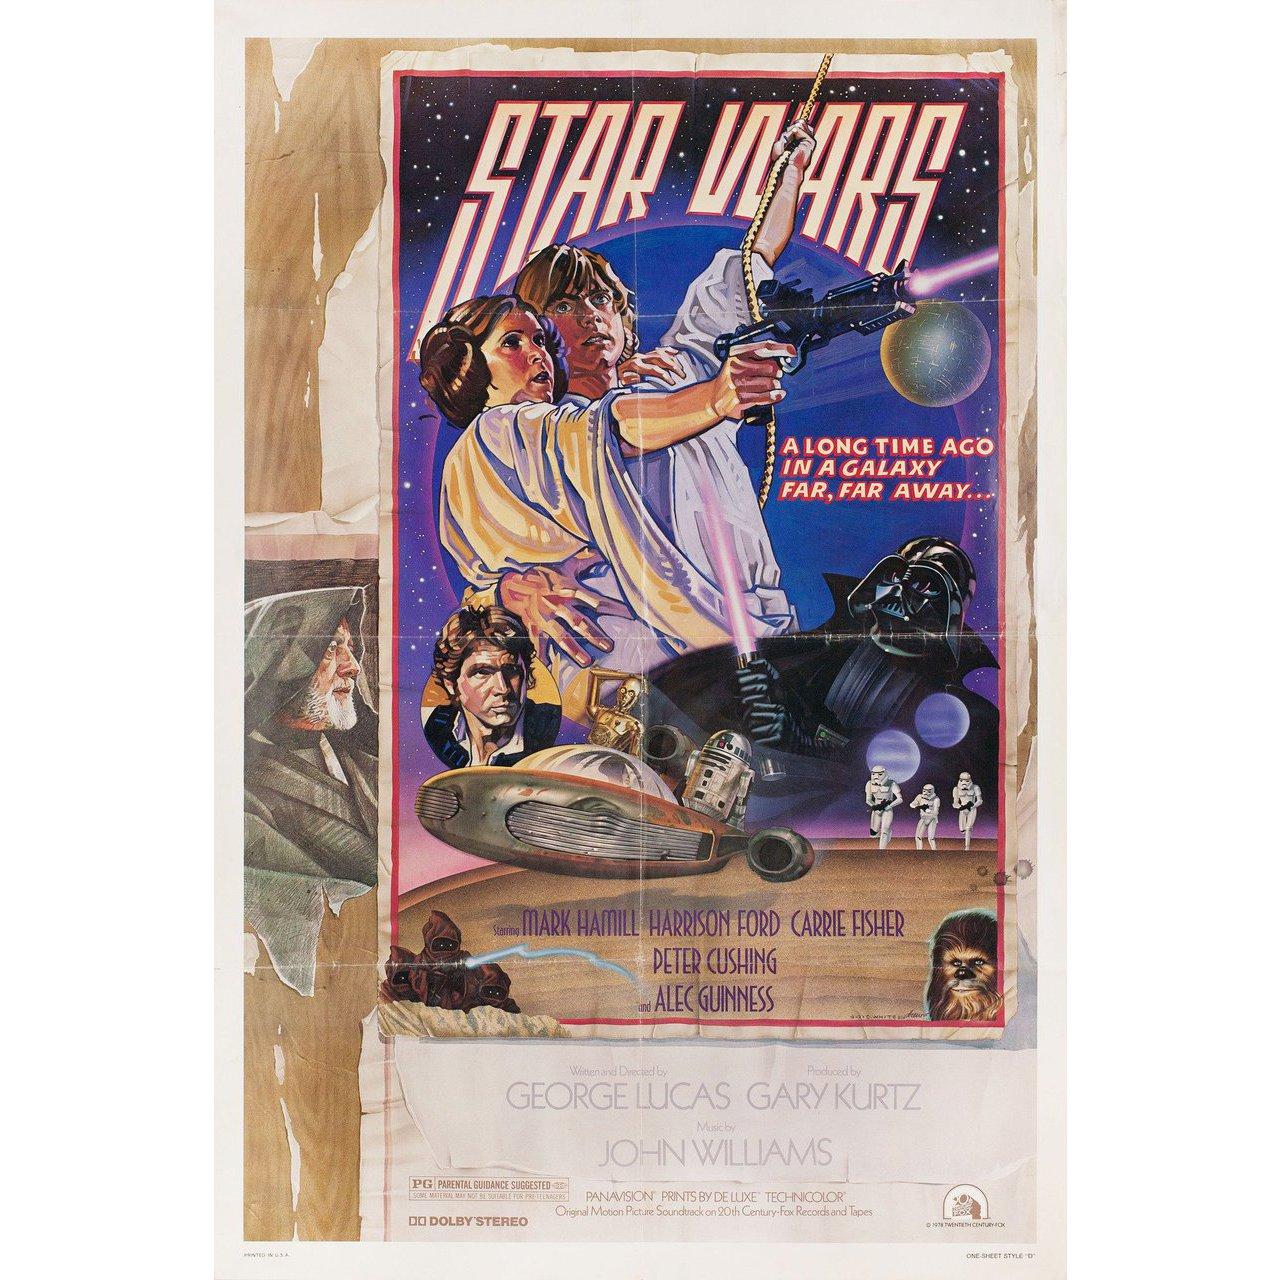 Original 1977 U.S. one sheet poster by Drew Struzan / Charles White III for. Very good fine condition, folded with edge wear. Many original posters were issued folded or were subsequently folded. Please note: the size is stated in inches and the